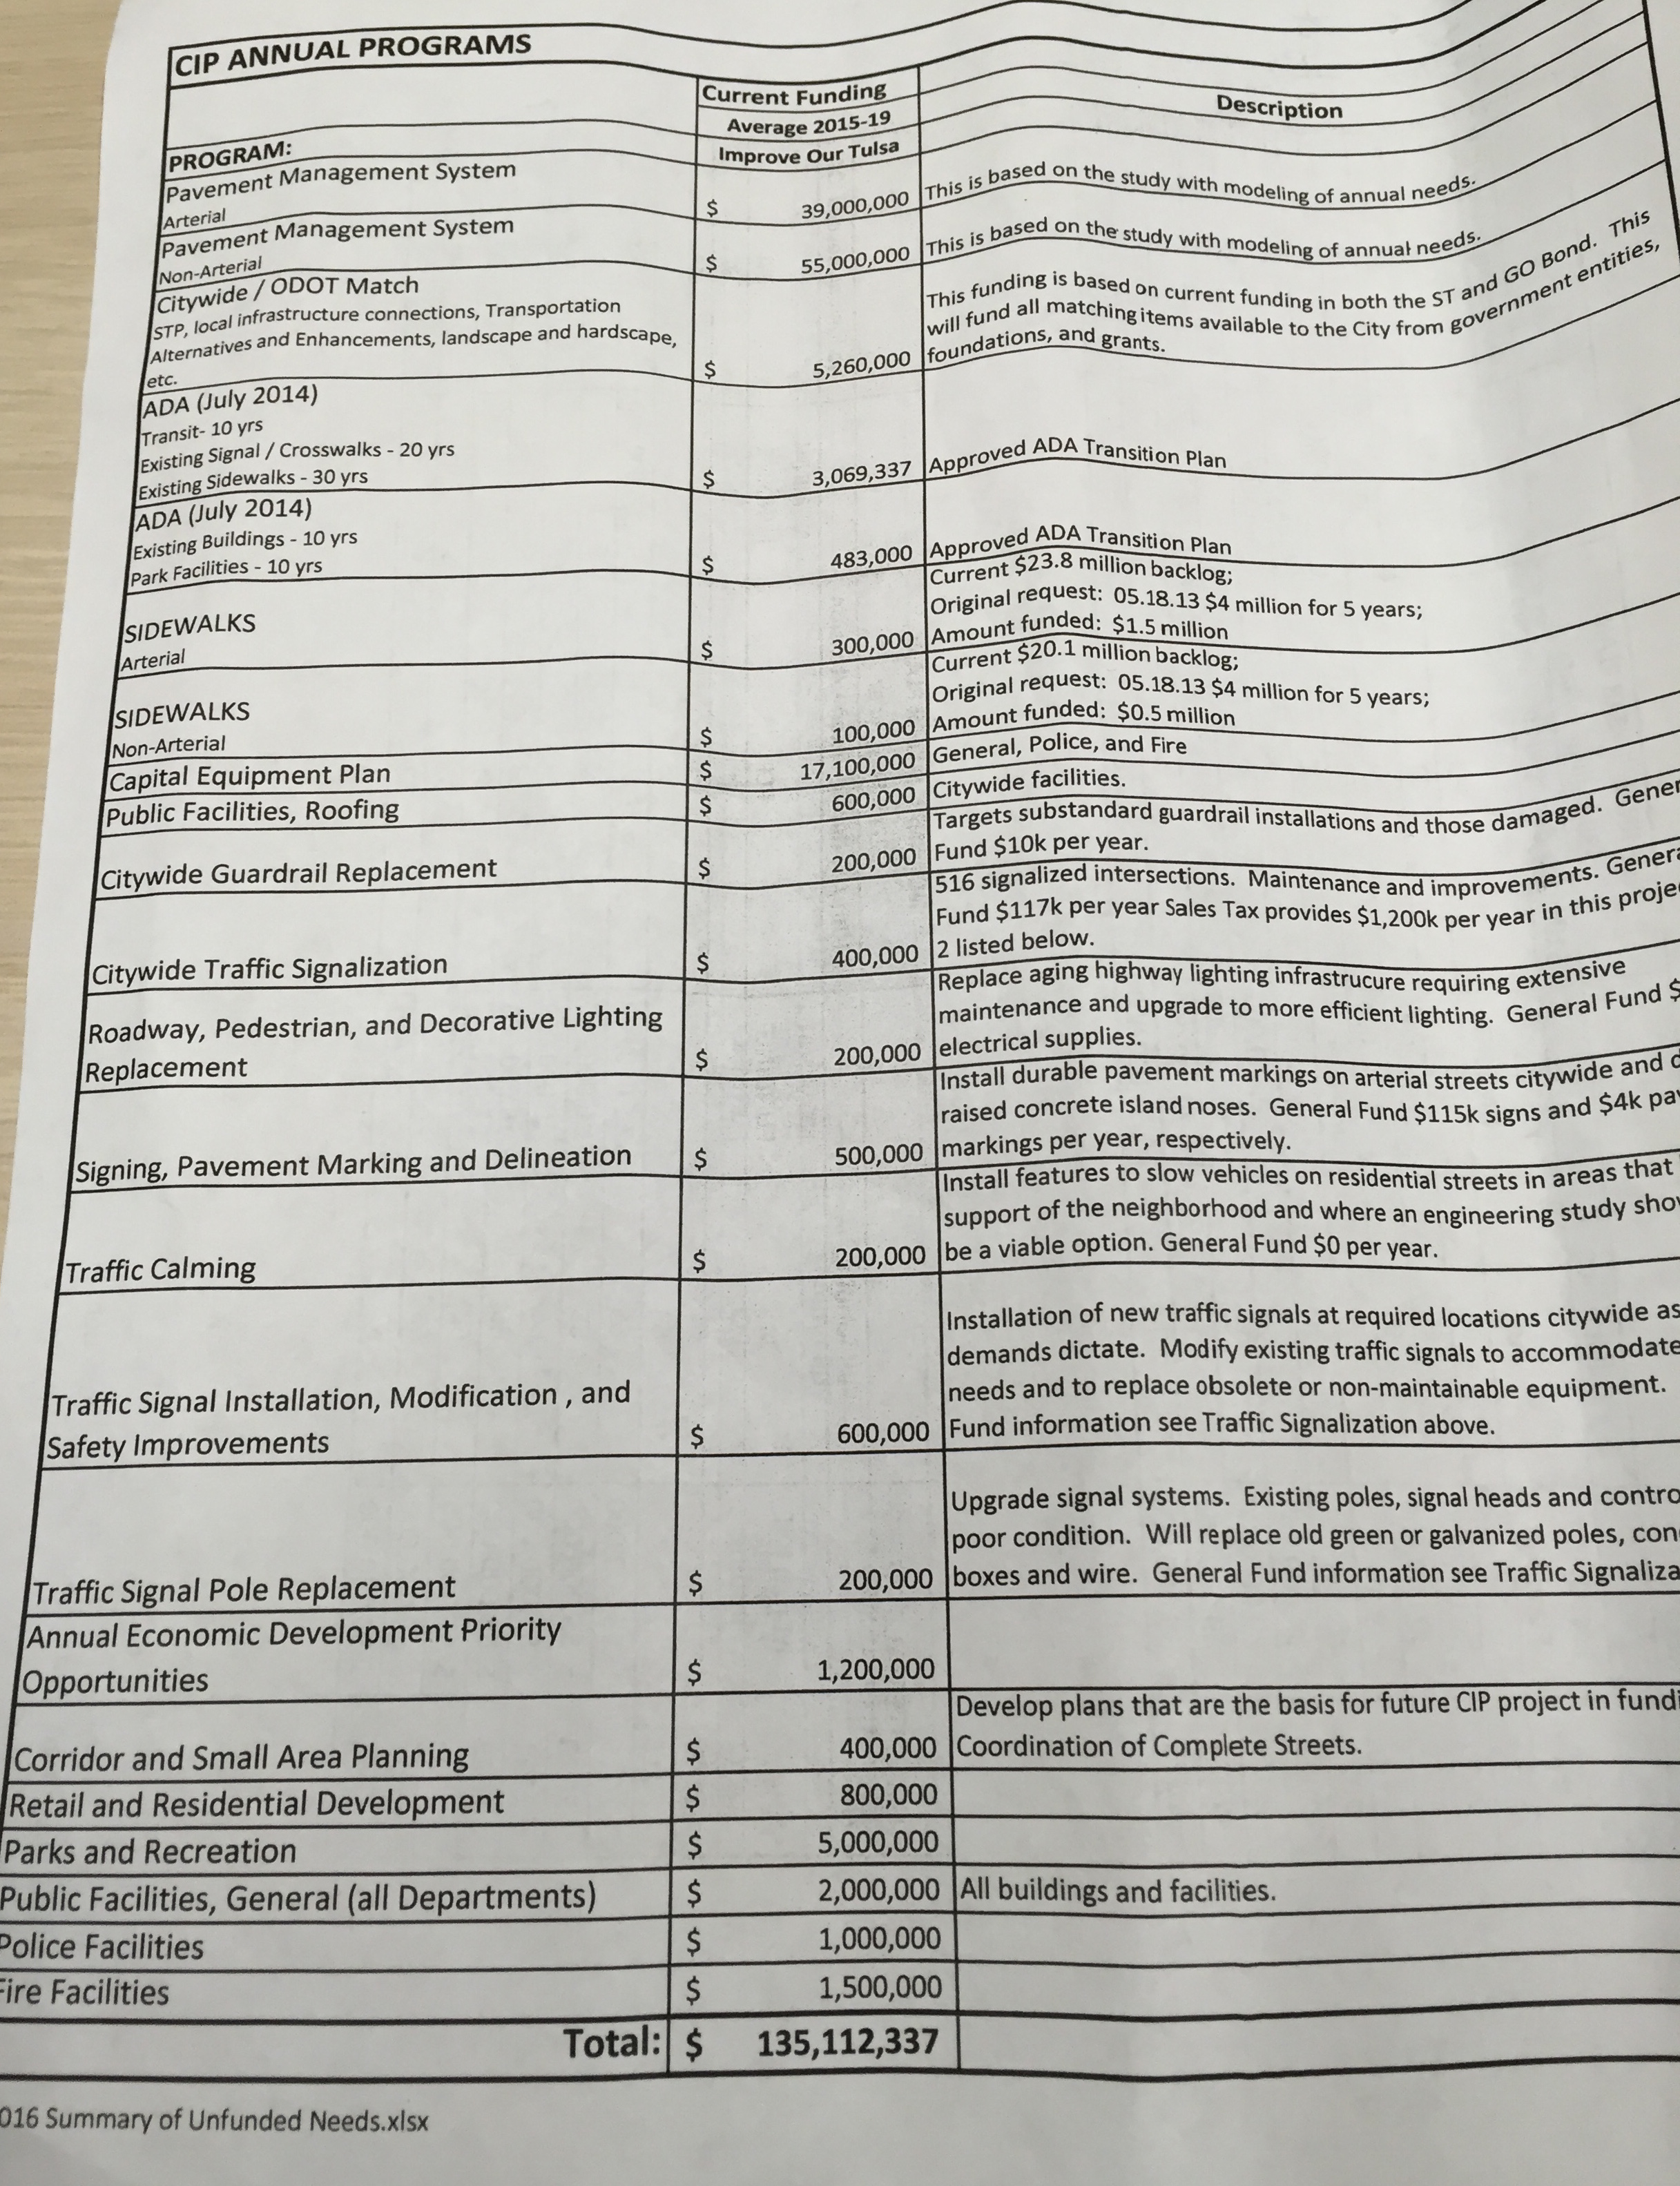 Above is the list of ongoing capital improvement needs the city would not have funding for if the current Vision 2025 sales tax proposal were approved. The city would be without $135 million annually from 2020 to 2023. PROVIDED